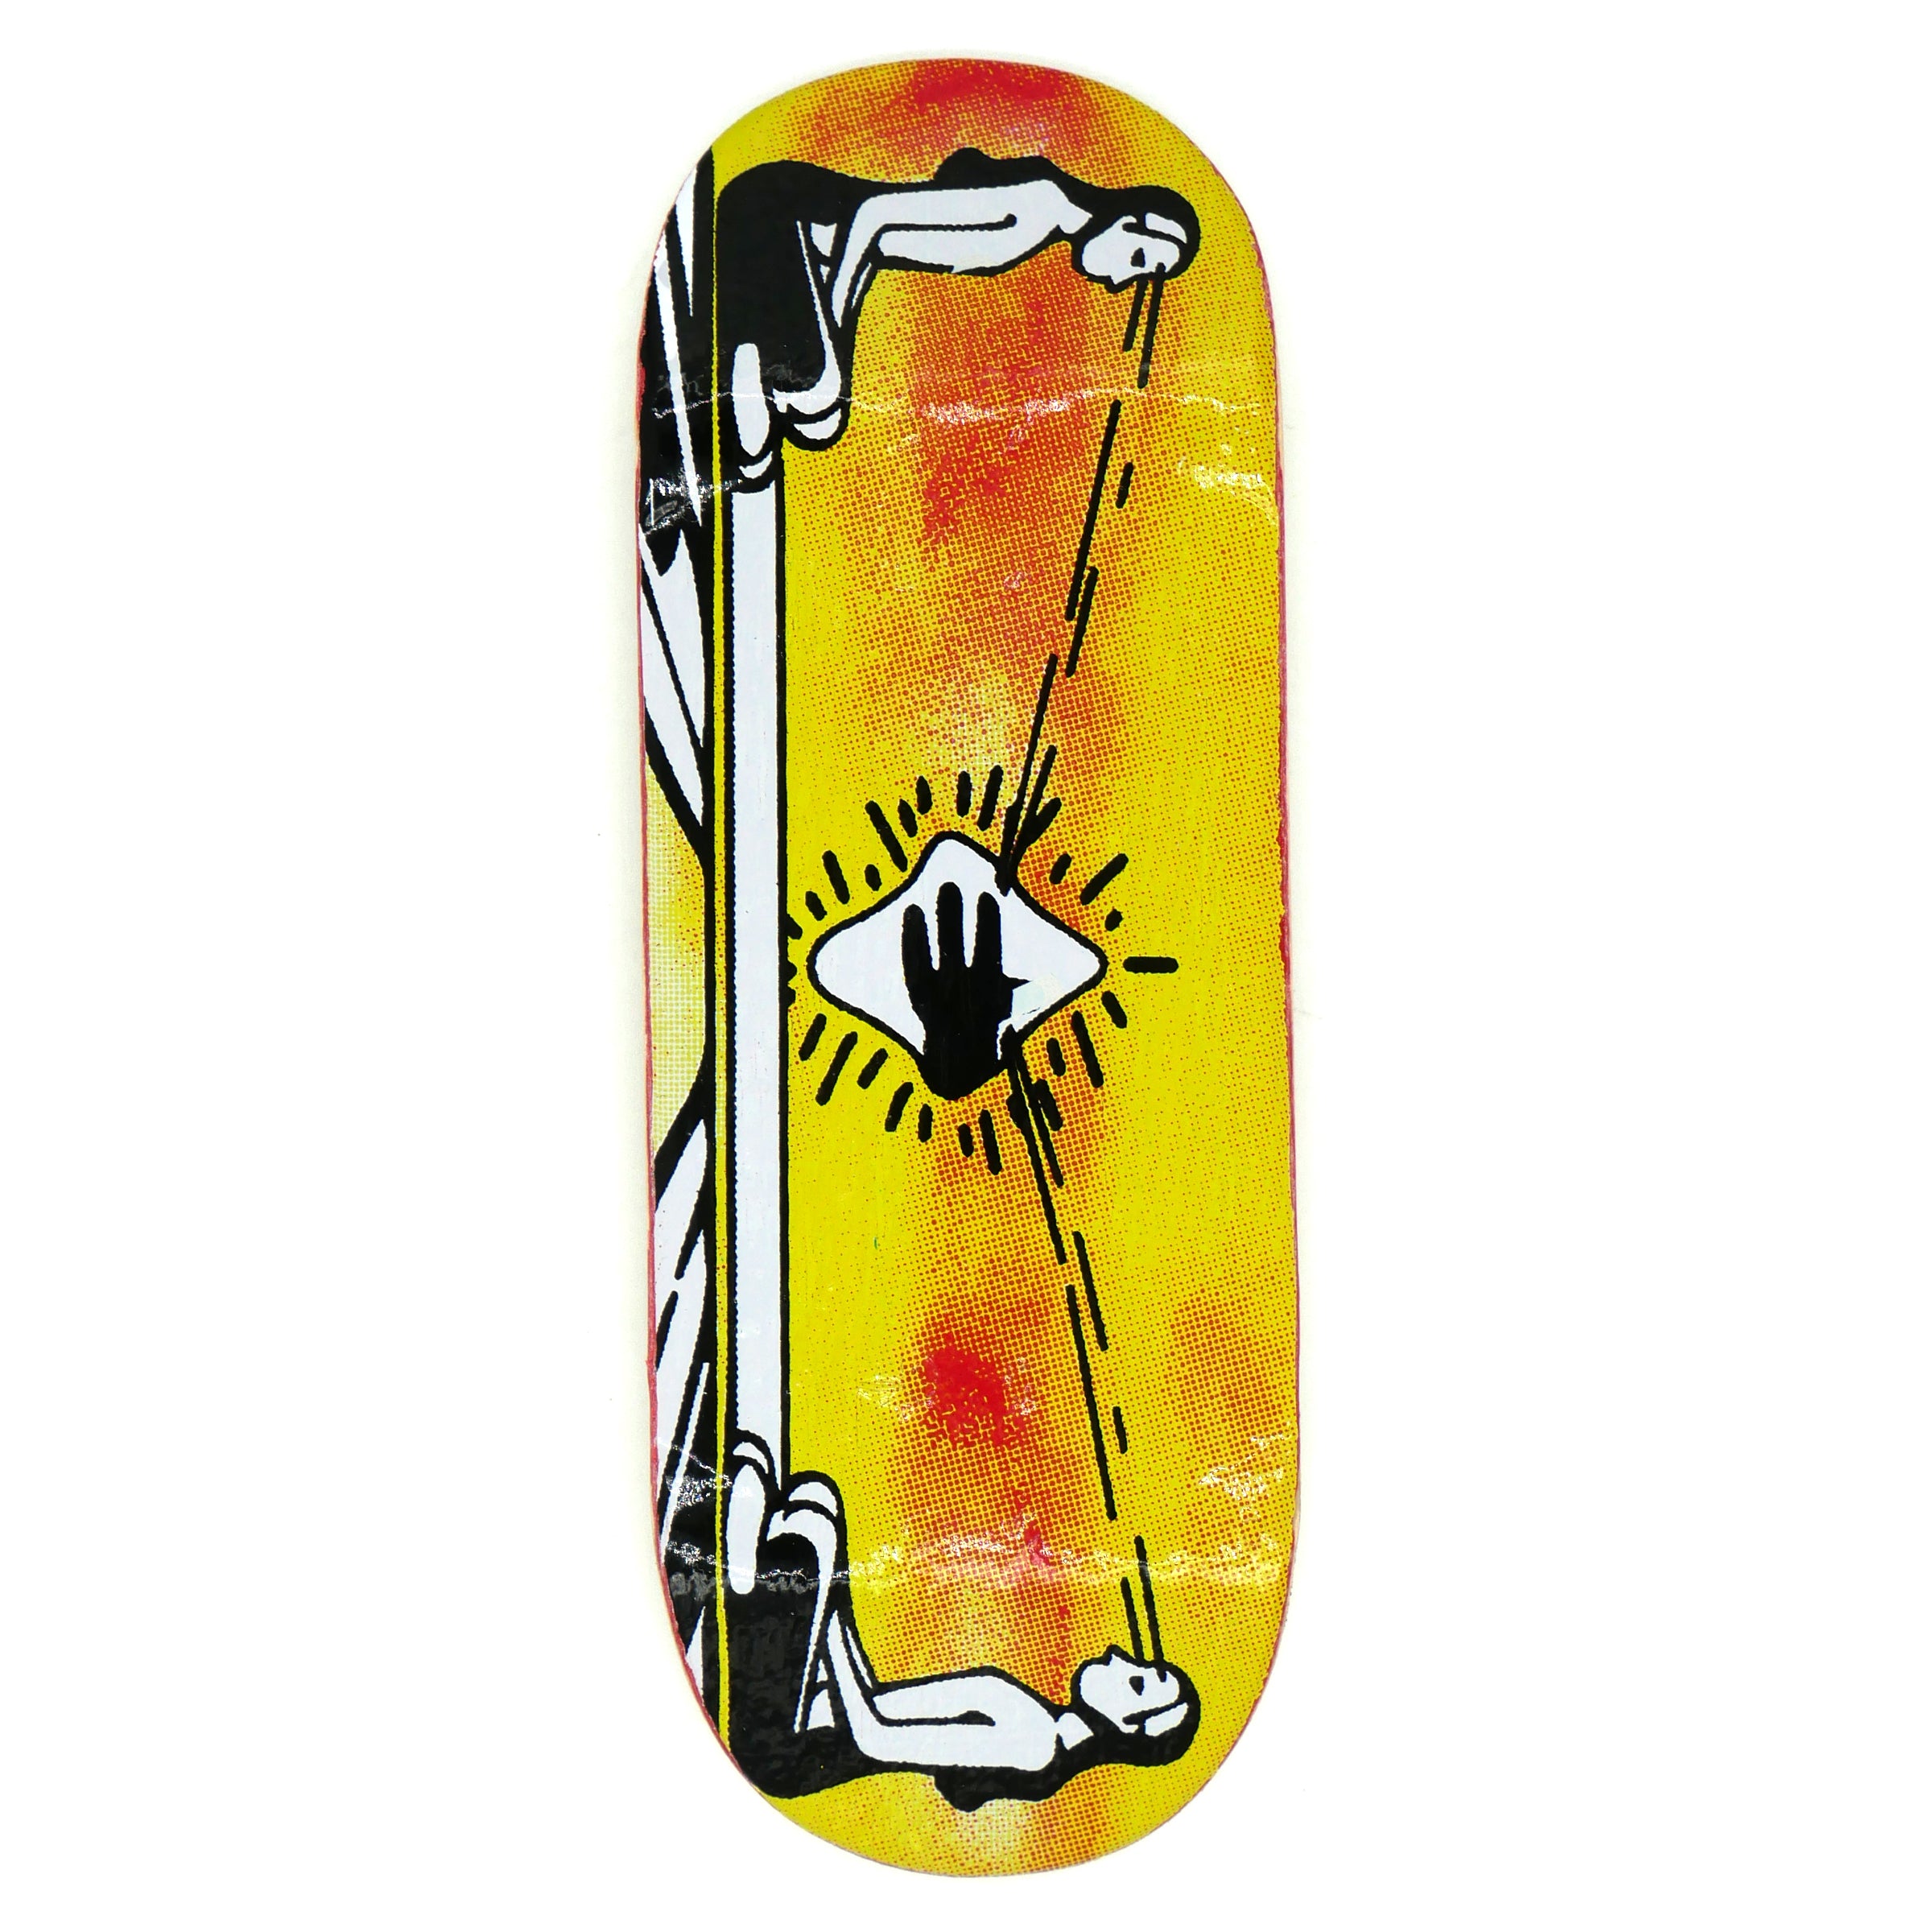 Cowply "From Within" Fingerboard Deck MINI Skate Shop Cowply    Slushcult